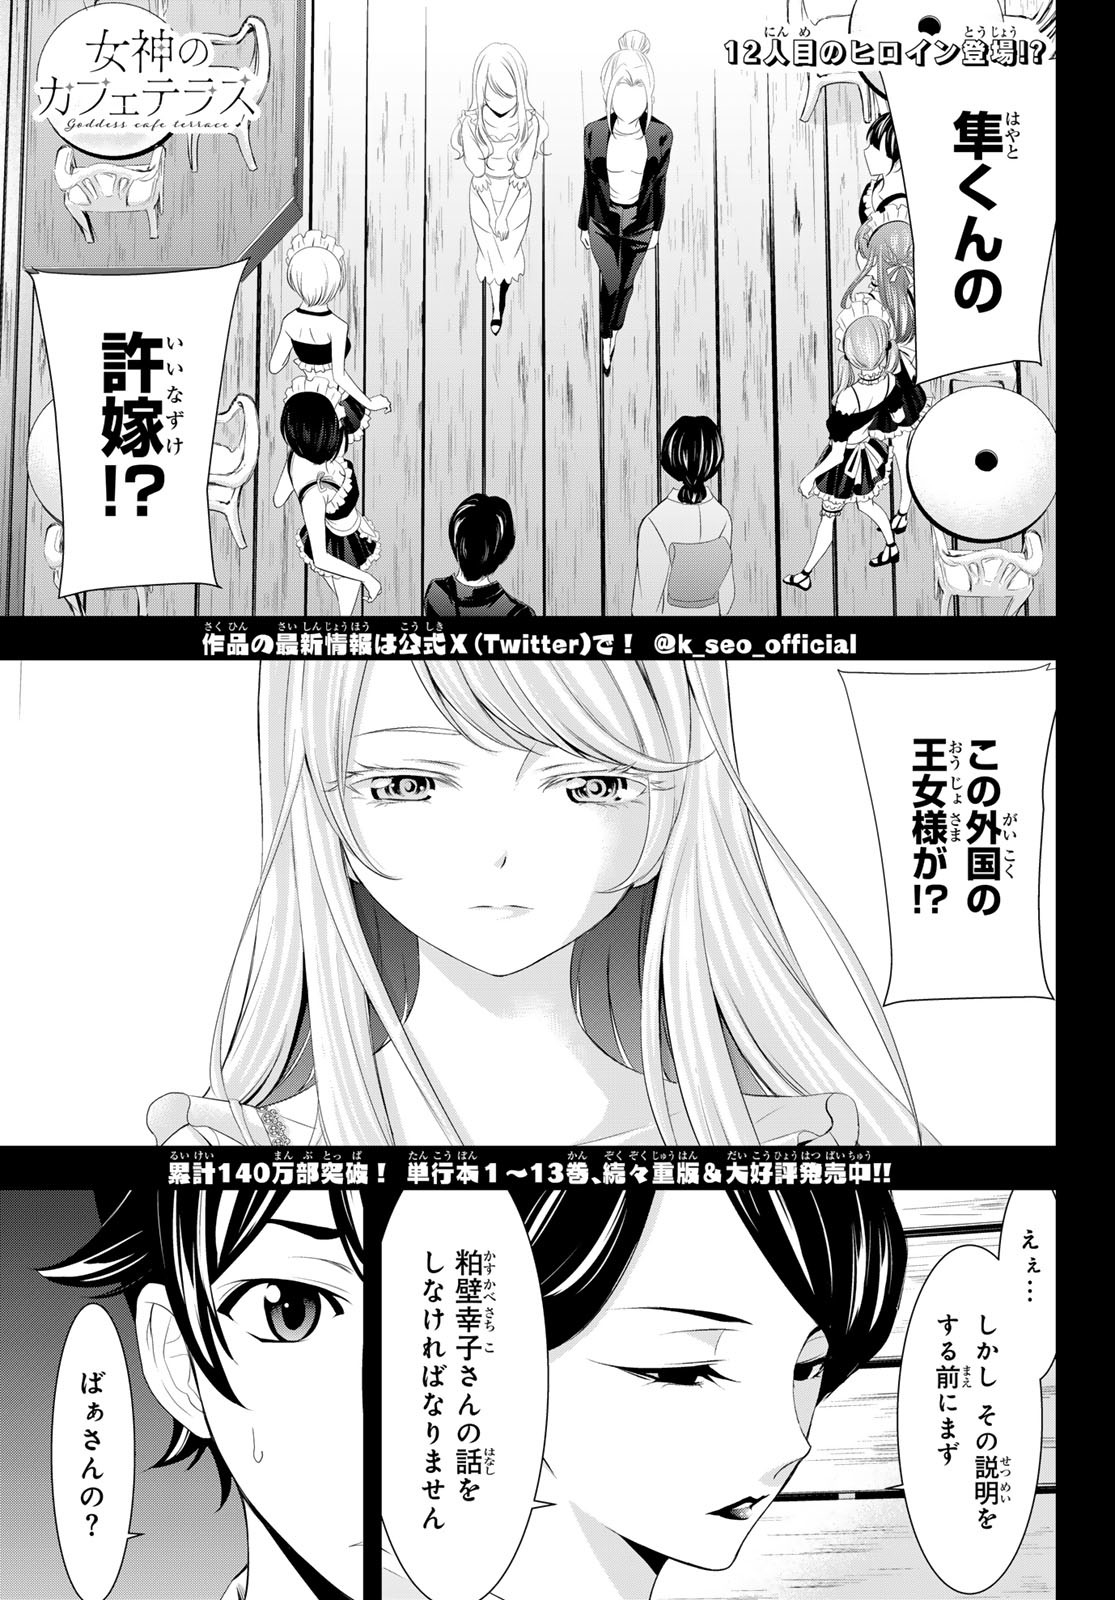 Megami no Cafe Terace - Chapter 136 - Page 1